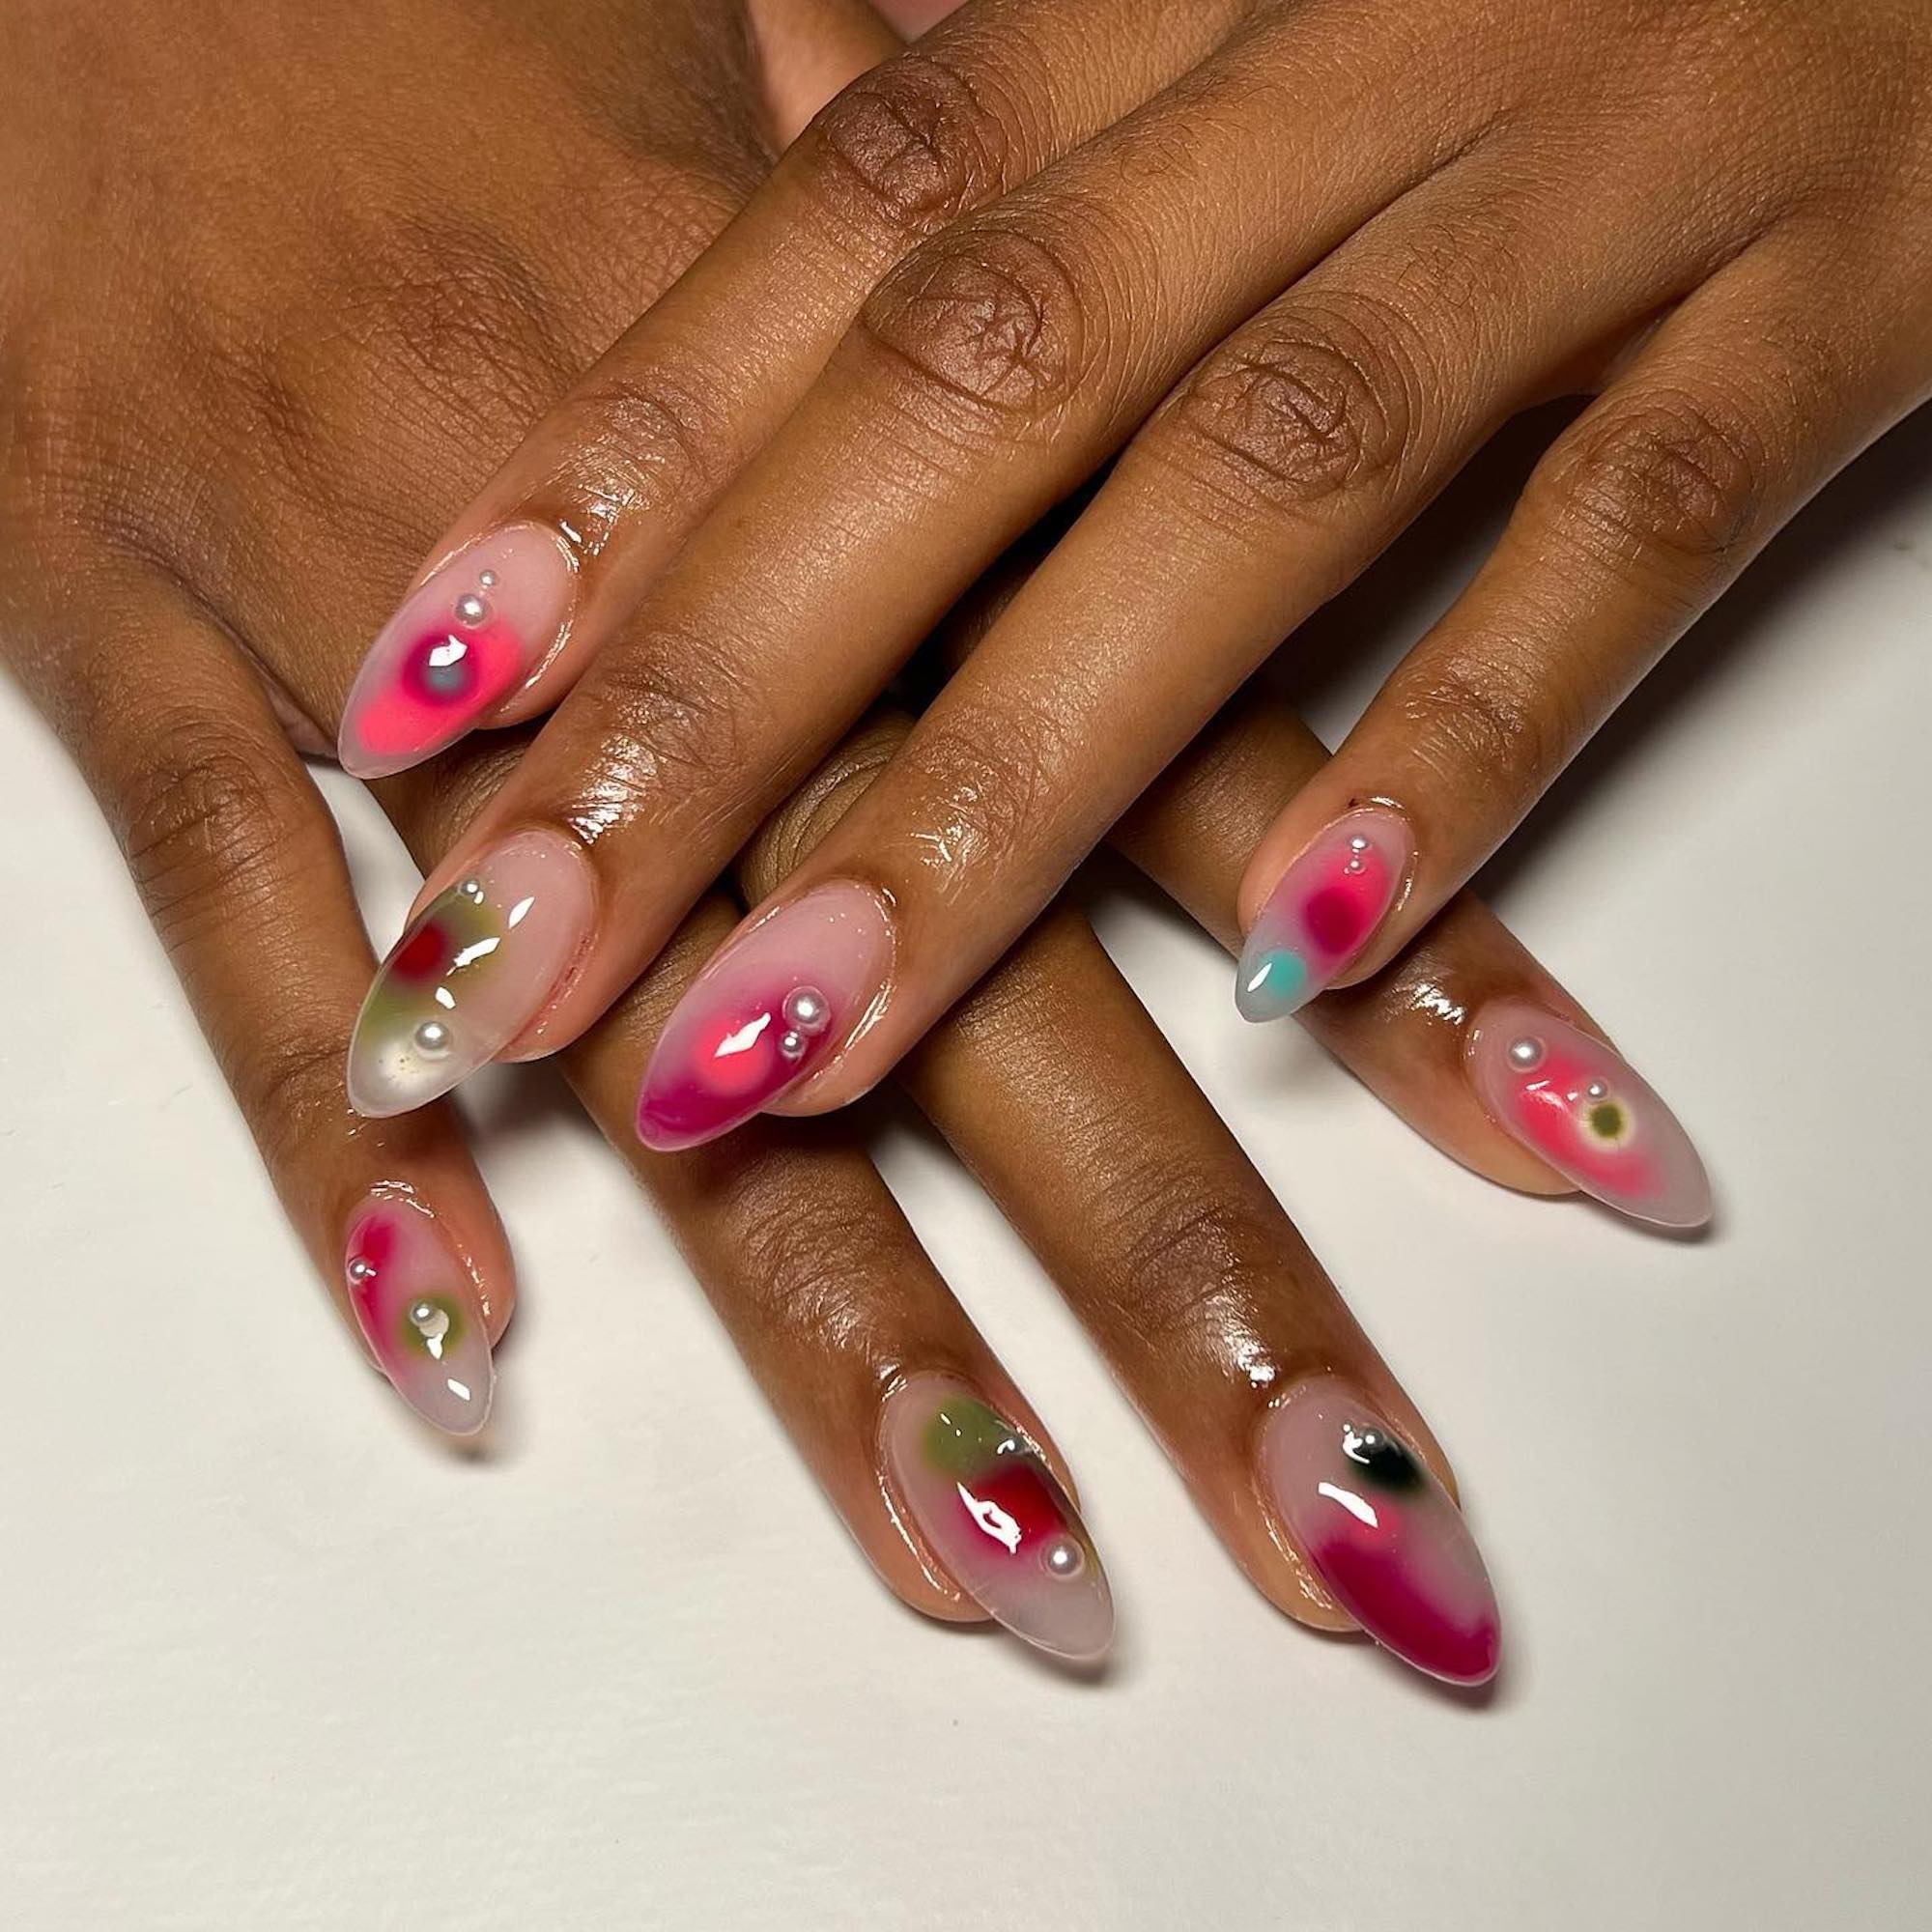 Gel Nails vs Nail Wraps: What are the Differences & Which Manicure